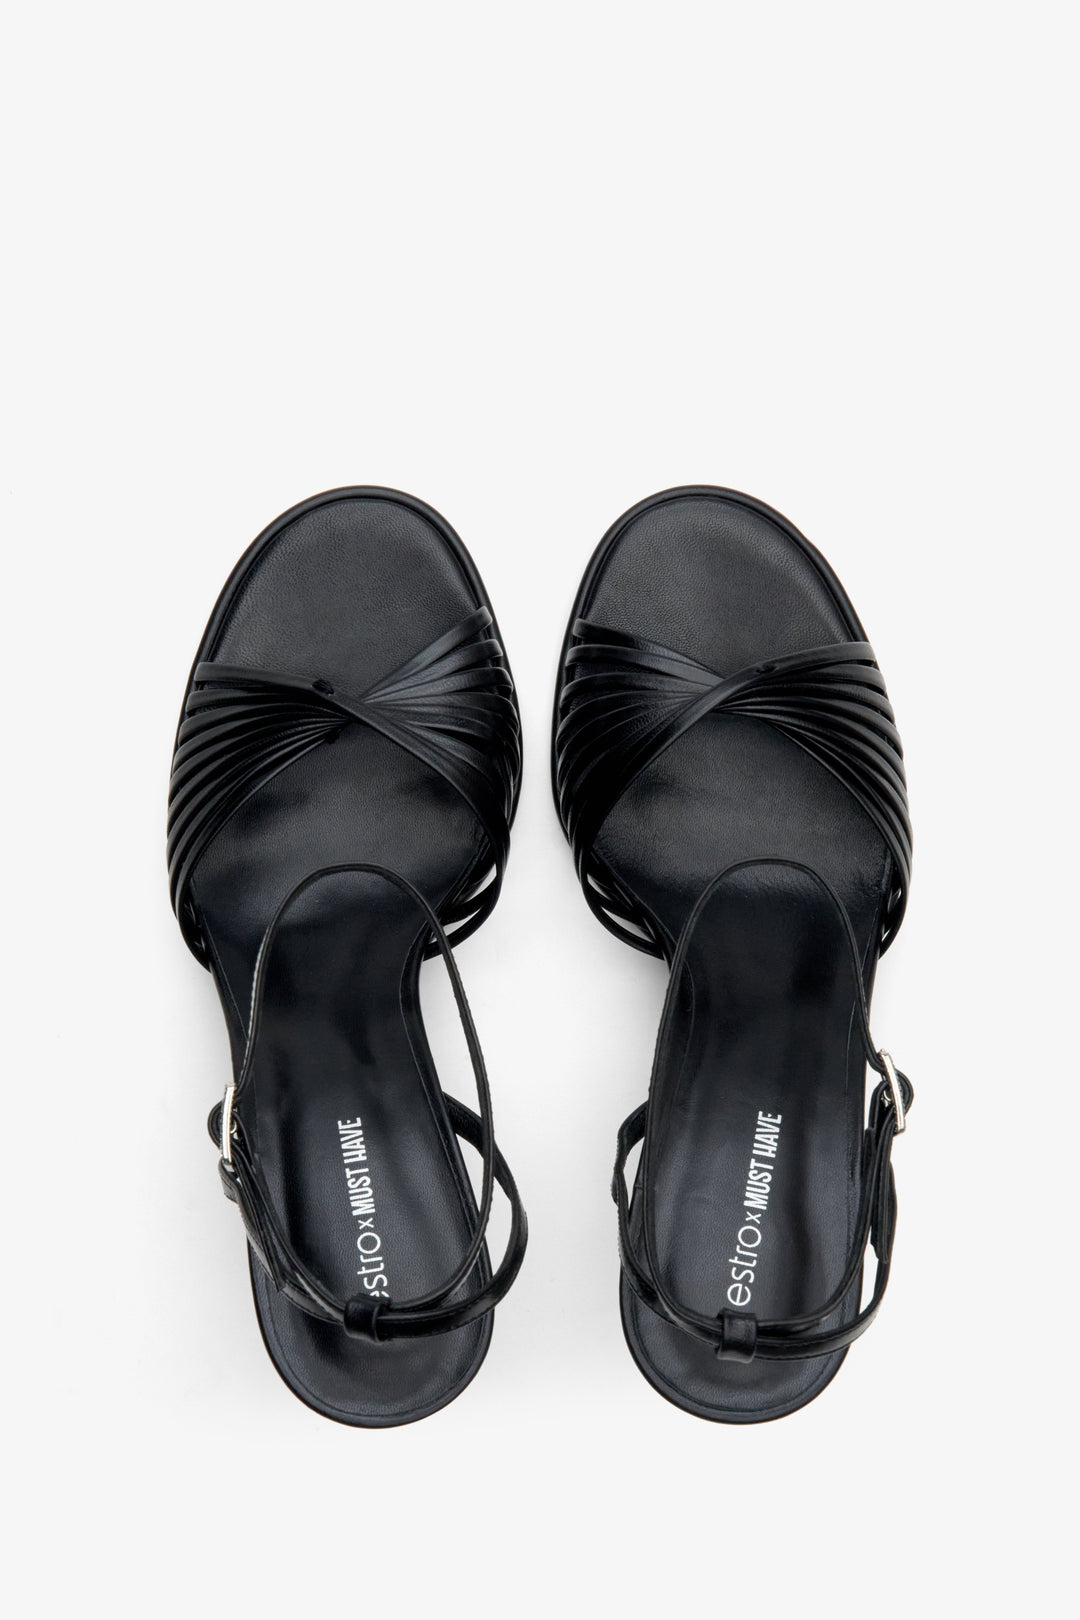 Estro x MustHave  leather women's black sandals made of genuine leather - top view presentation of the footwear.